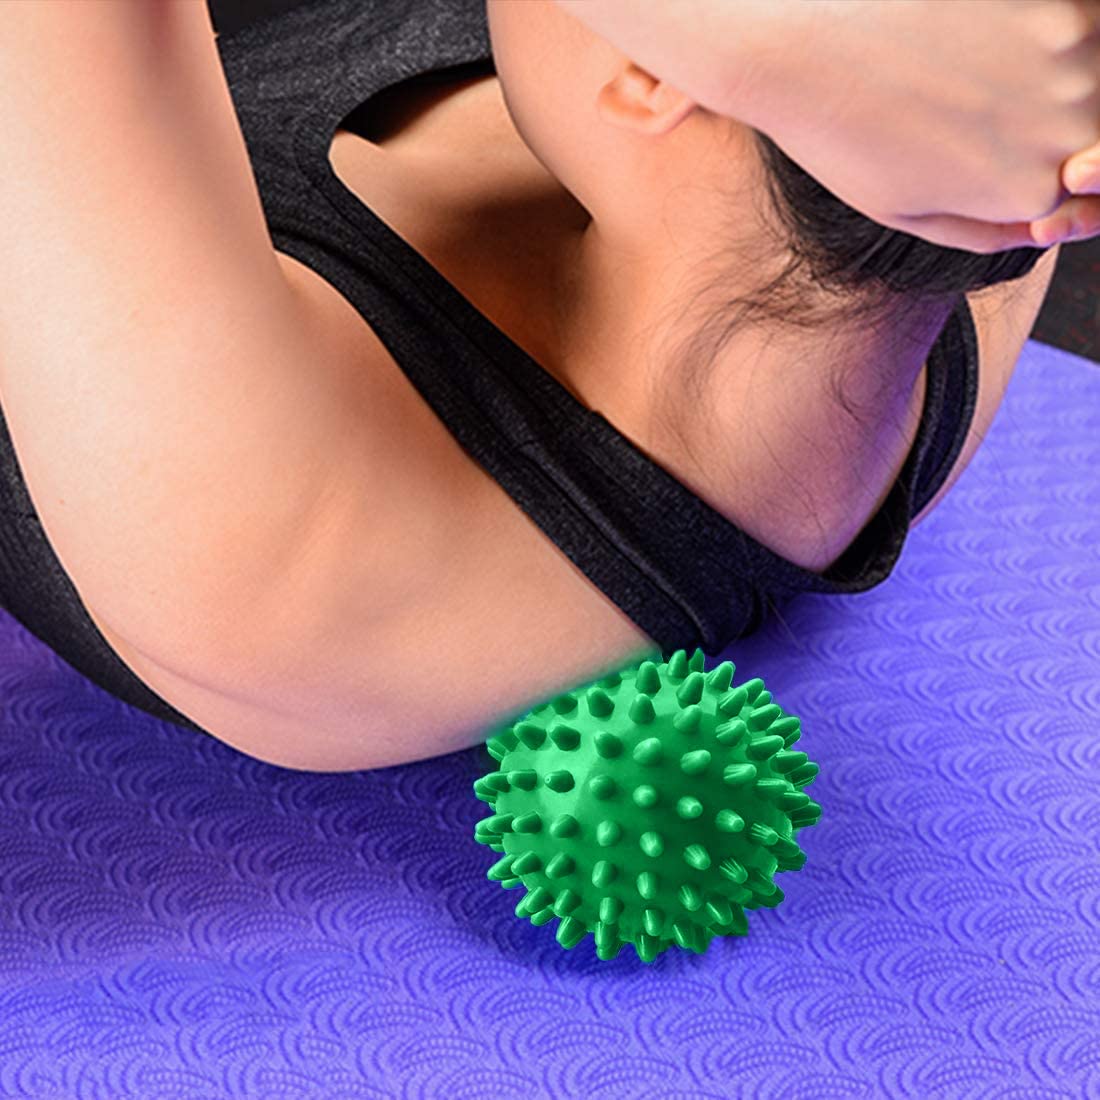 Strauss Acupressure Massage Ball, 3.5 inch | Ideal for Physiotherapy, Deep Tissue Massage, Trigger Point Therapy, Muscle Knots | Acupressure Therapy Ball for Myofascial Release & Pain Relief, (Green)